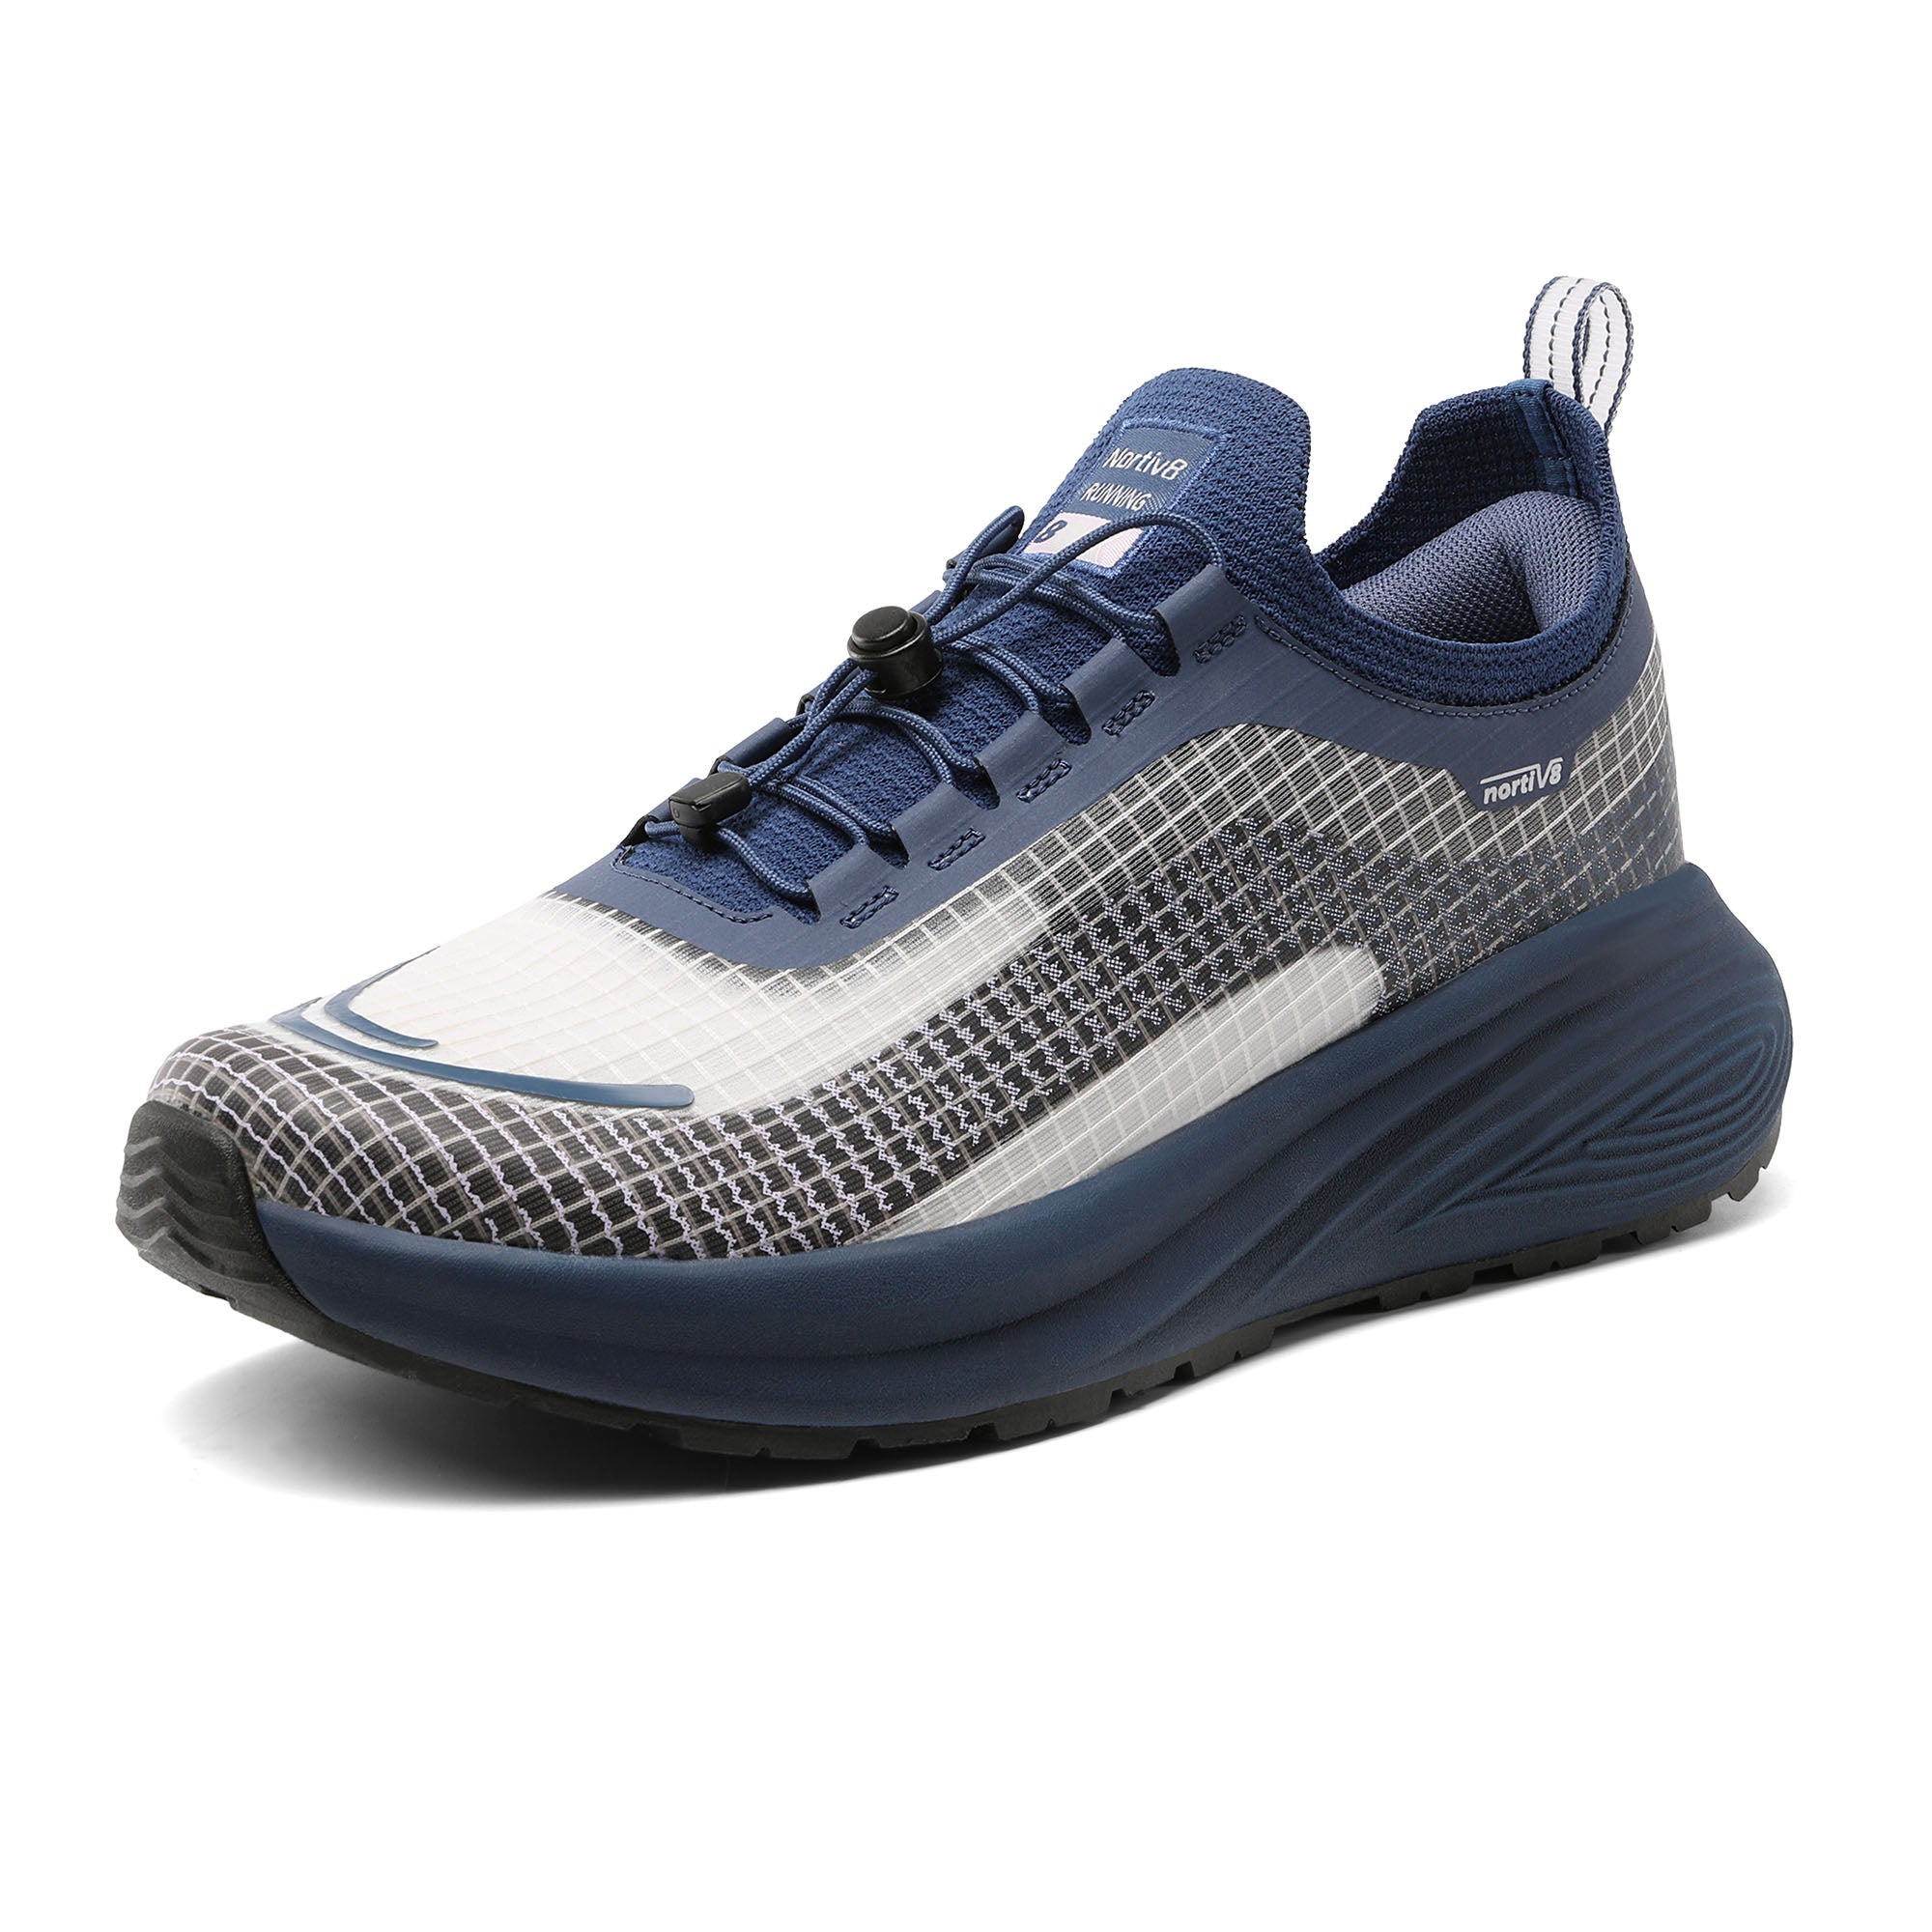 Men's Trail Running Shoes | Trail Shoes For Men-Nortiv8